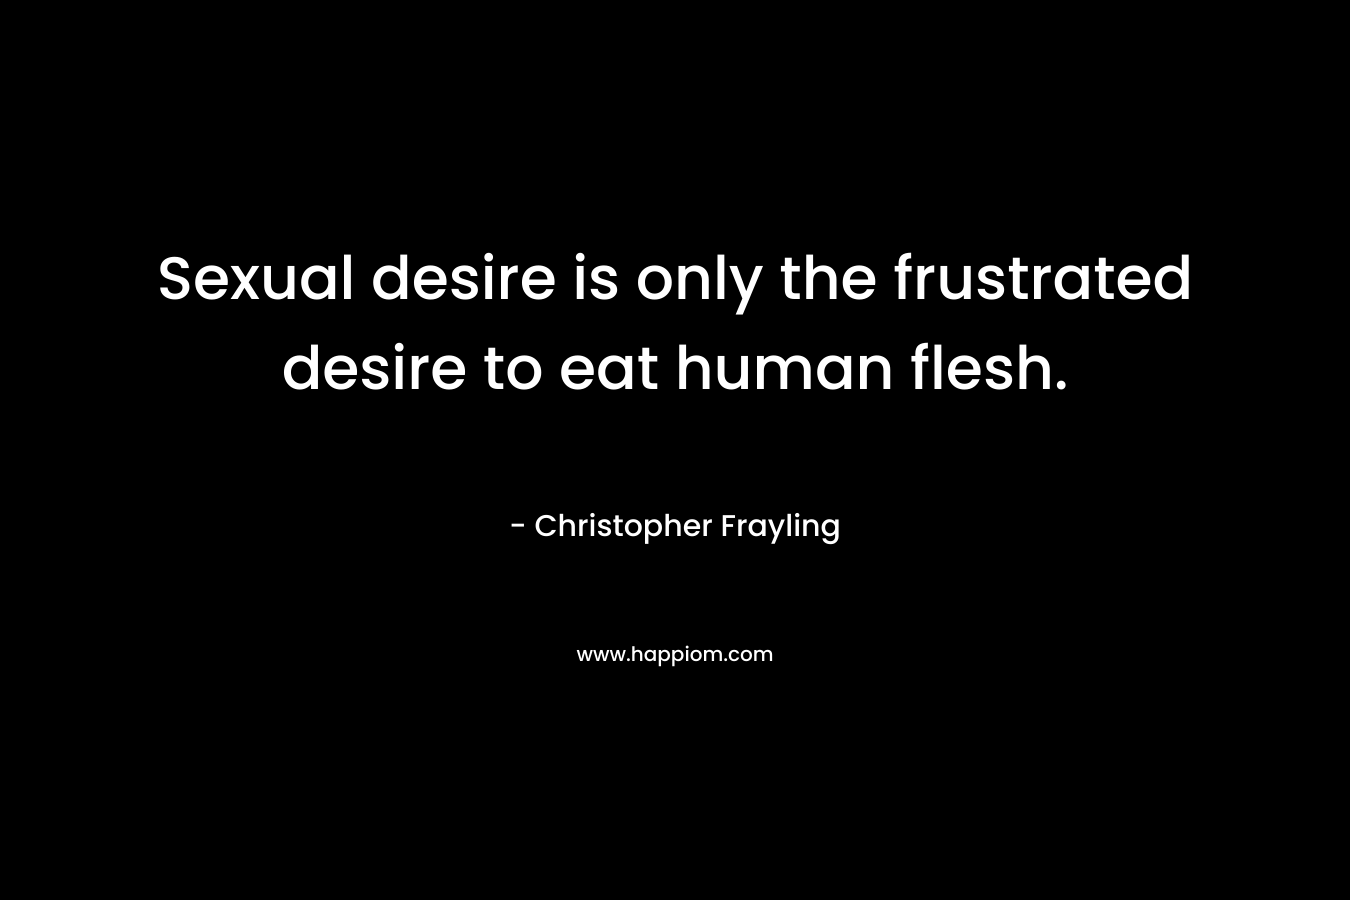 Sexual desire is only the frustrated desire to eat human flesh. – Christopher Frayling